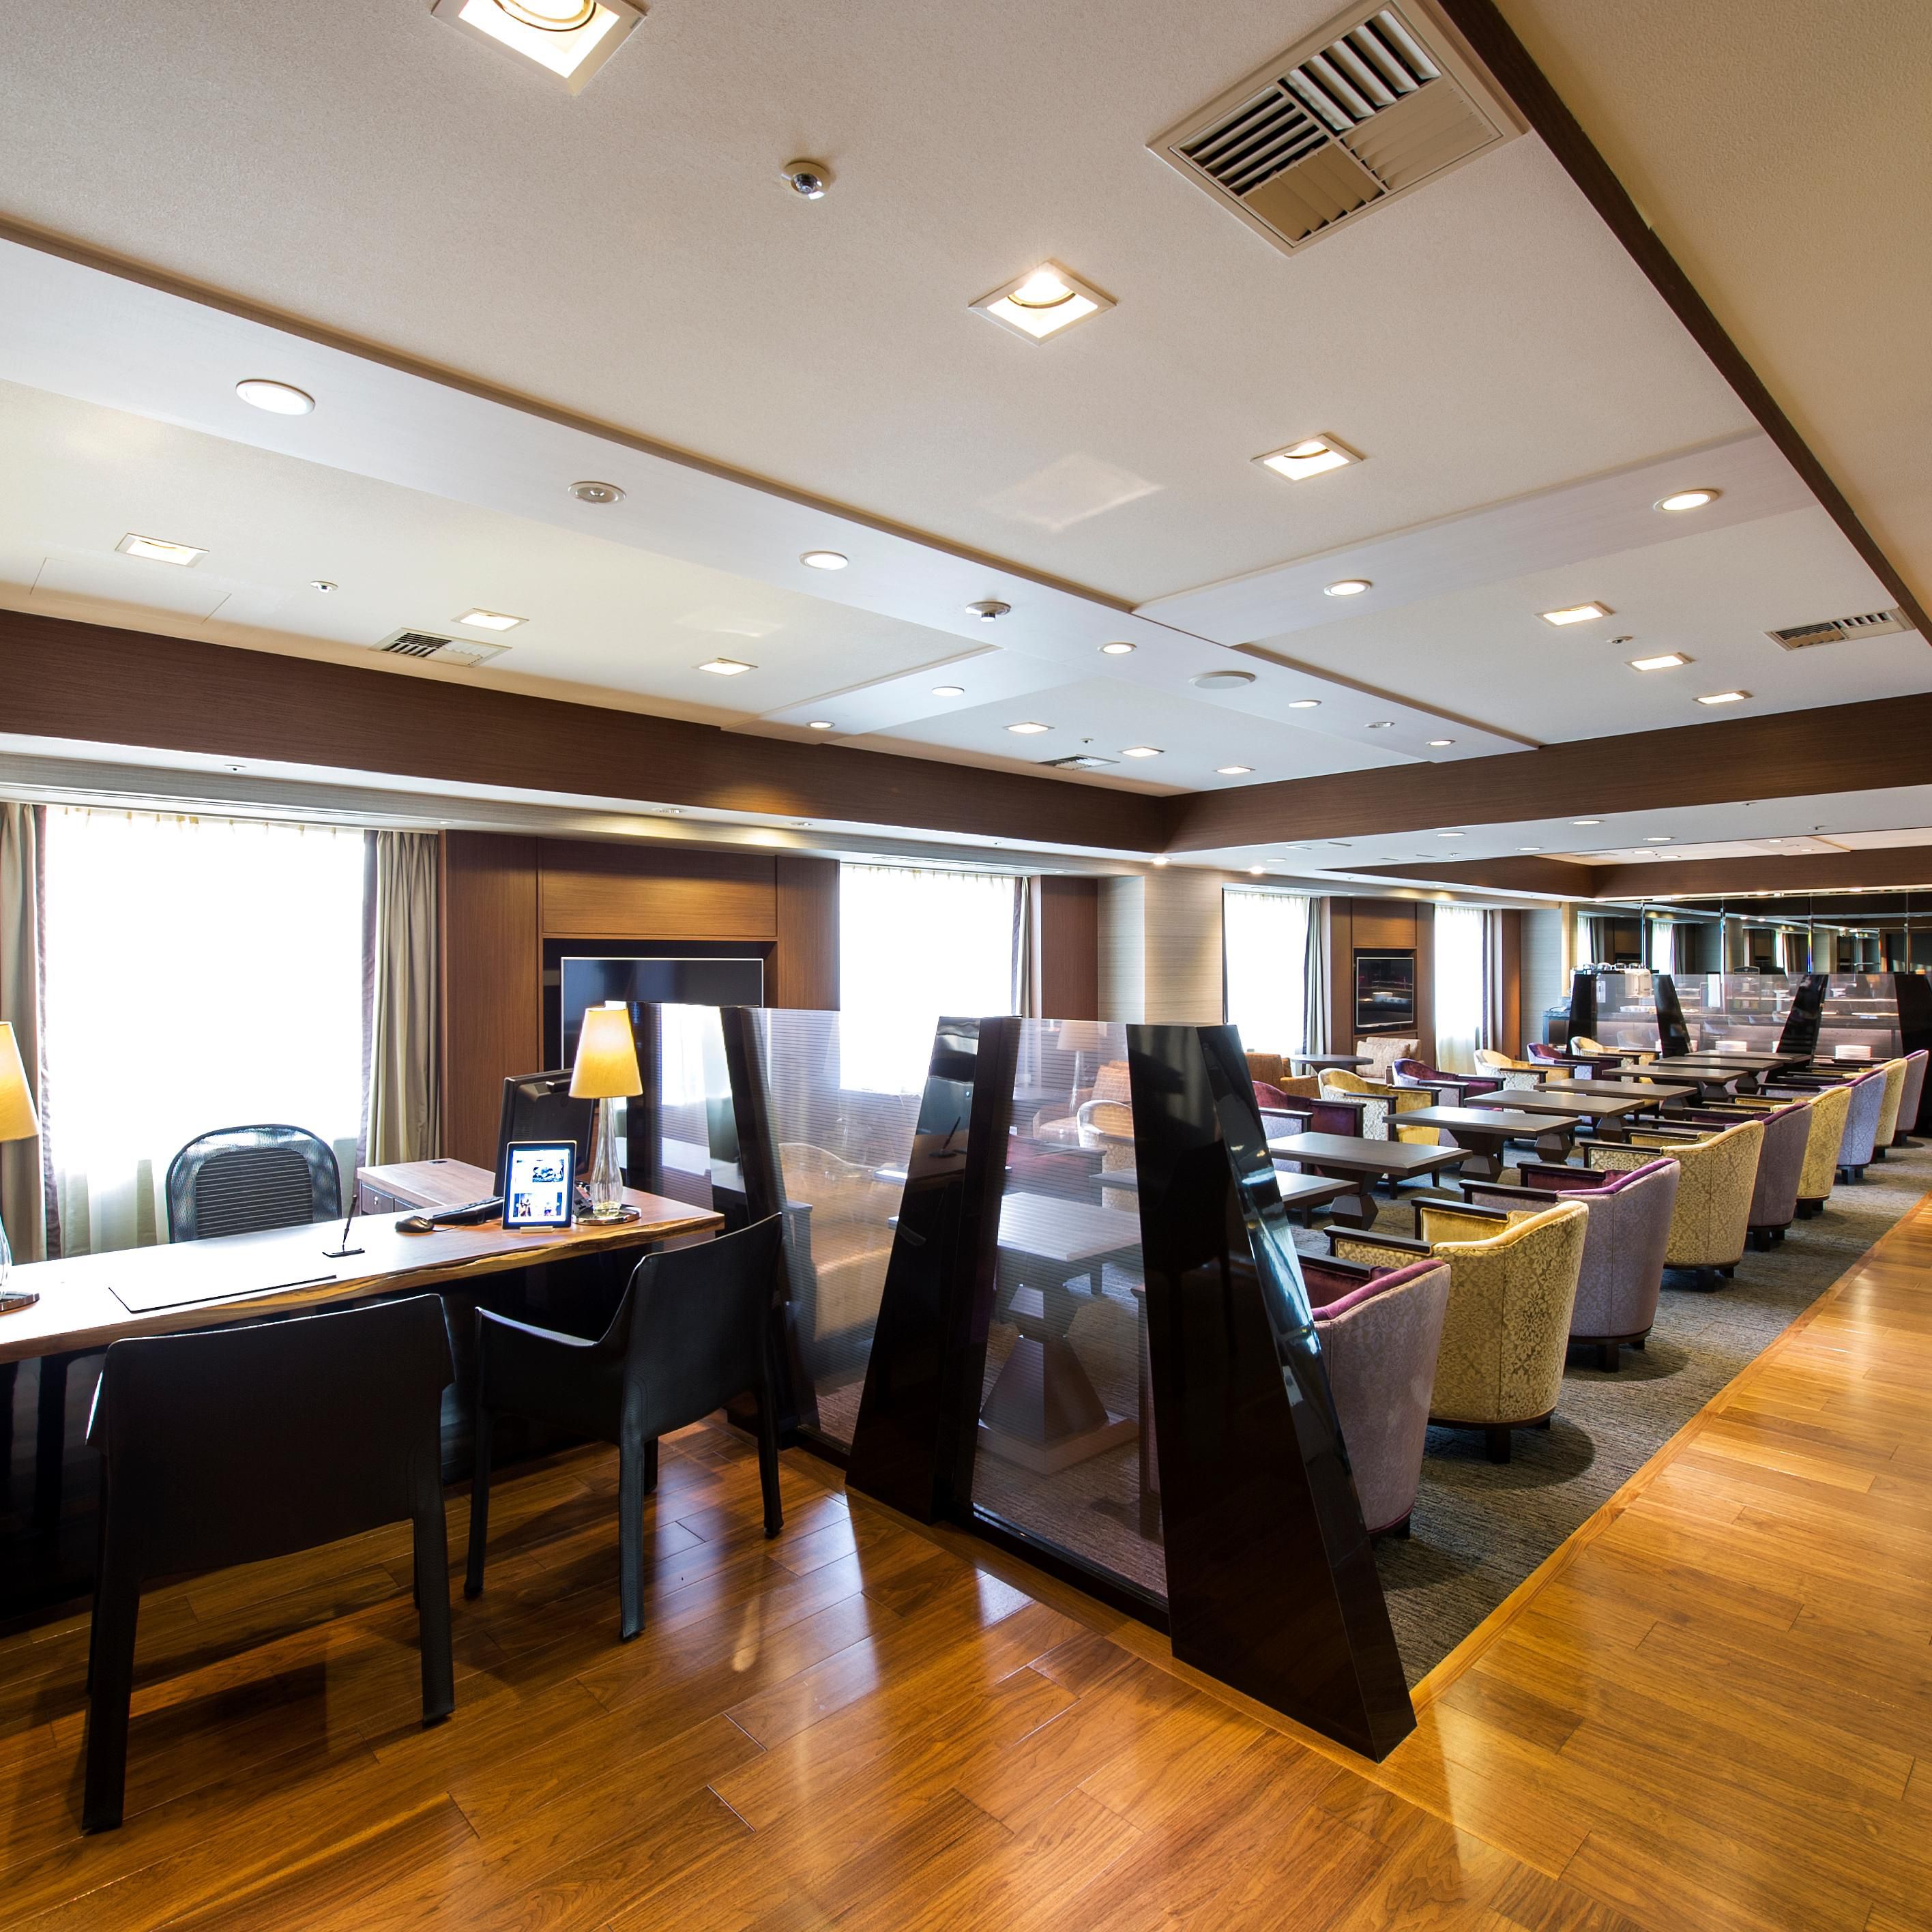 Club Lounge is exclusively for the guests staying on Club Floor.